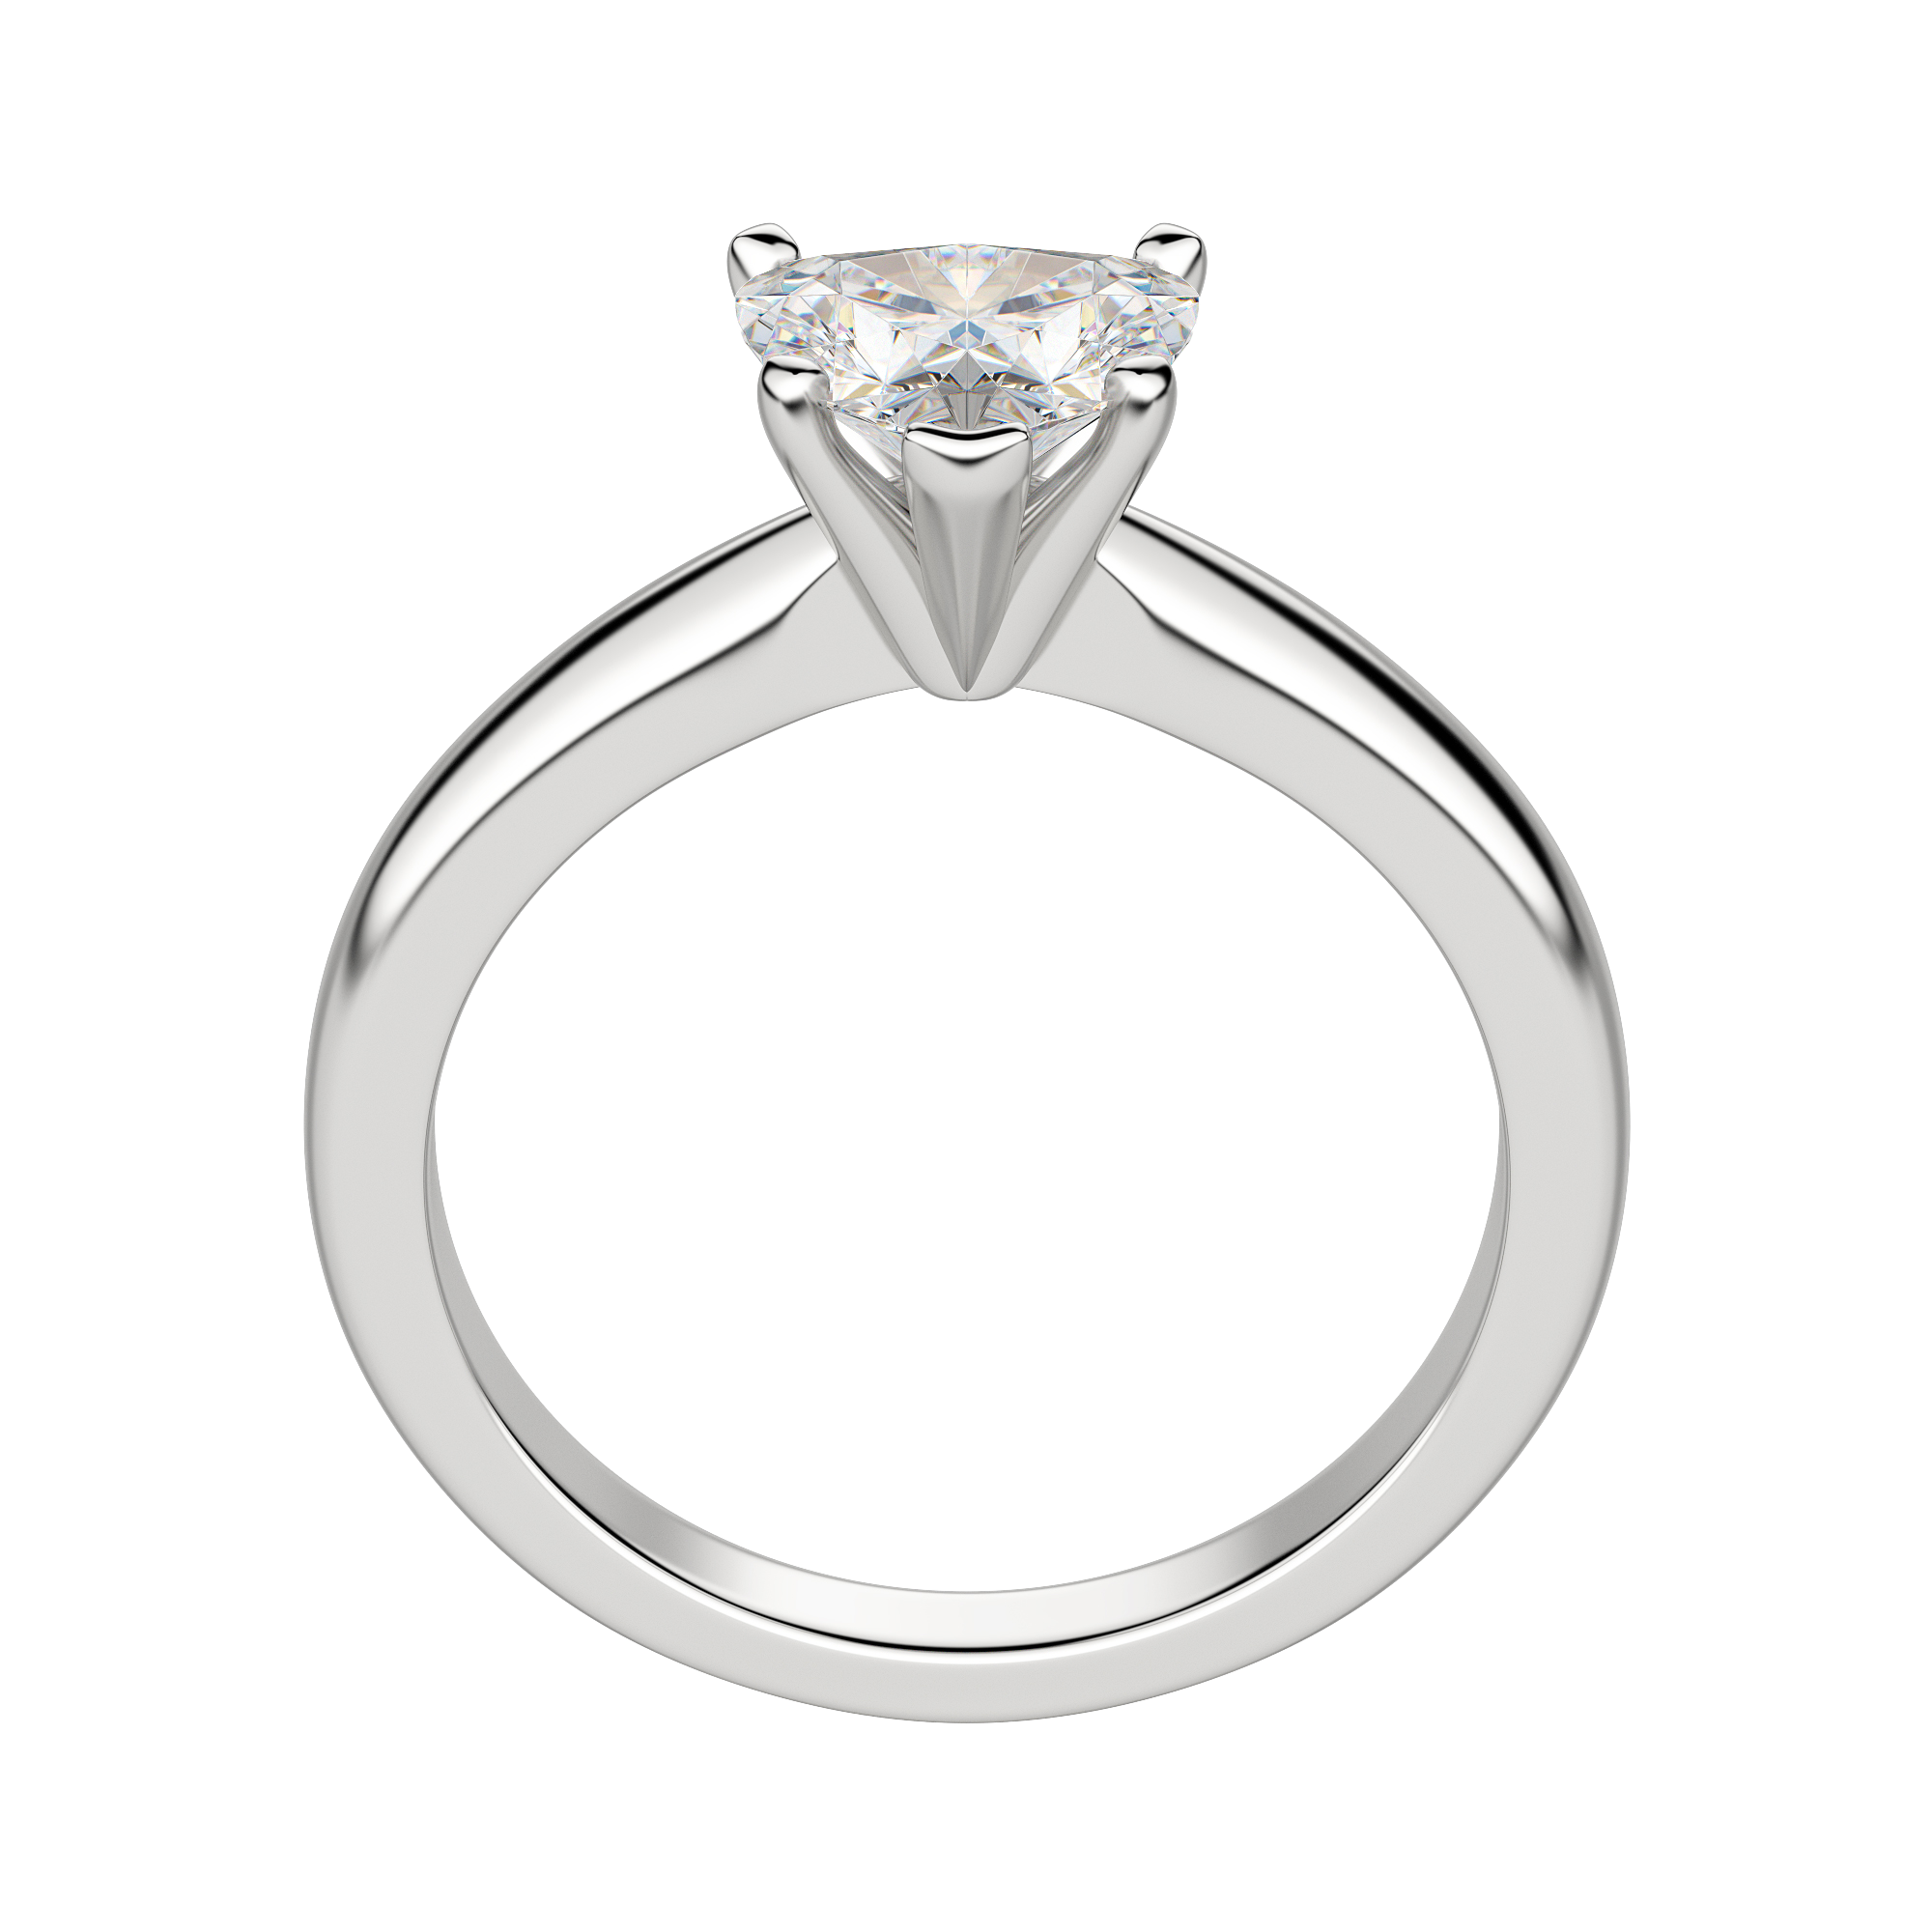 Isle Heart Cut Engagement Ring, Hover, Platinum, 18K White Gold, 